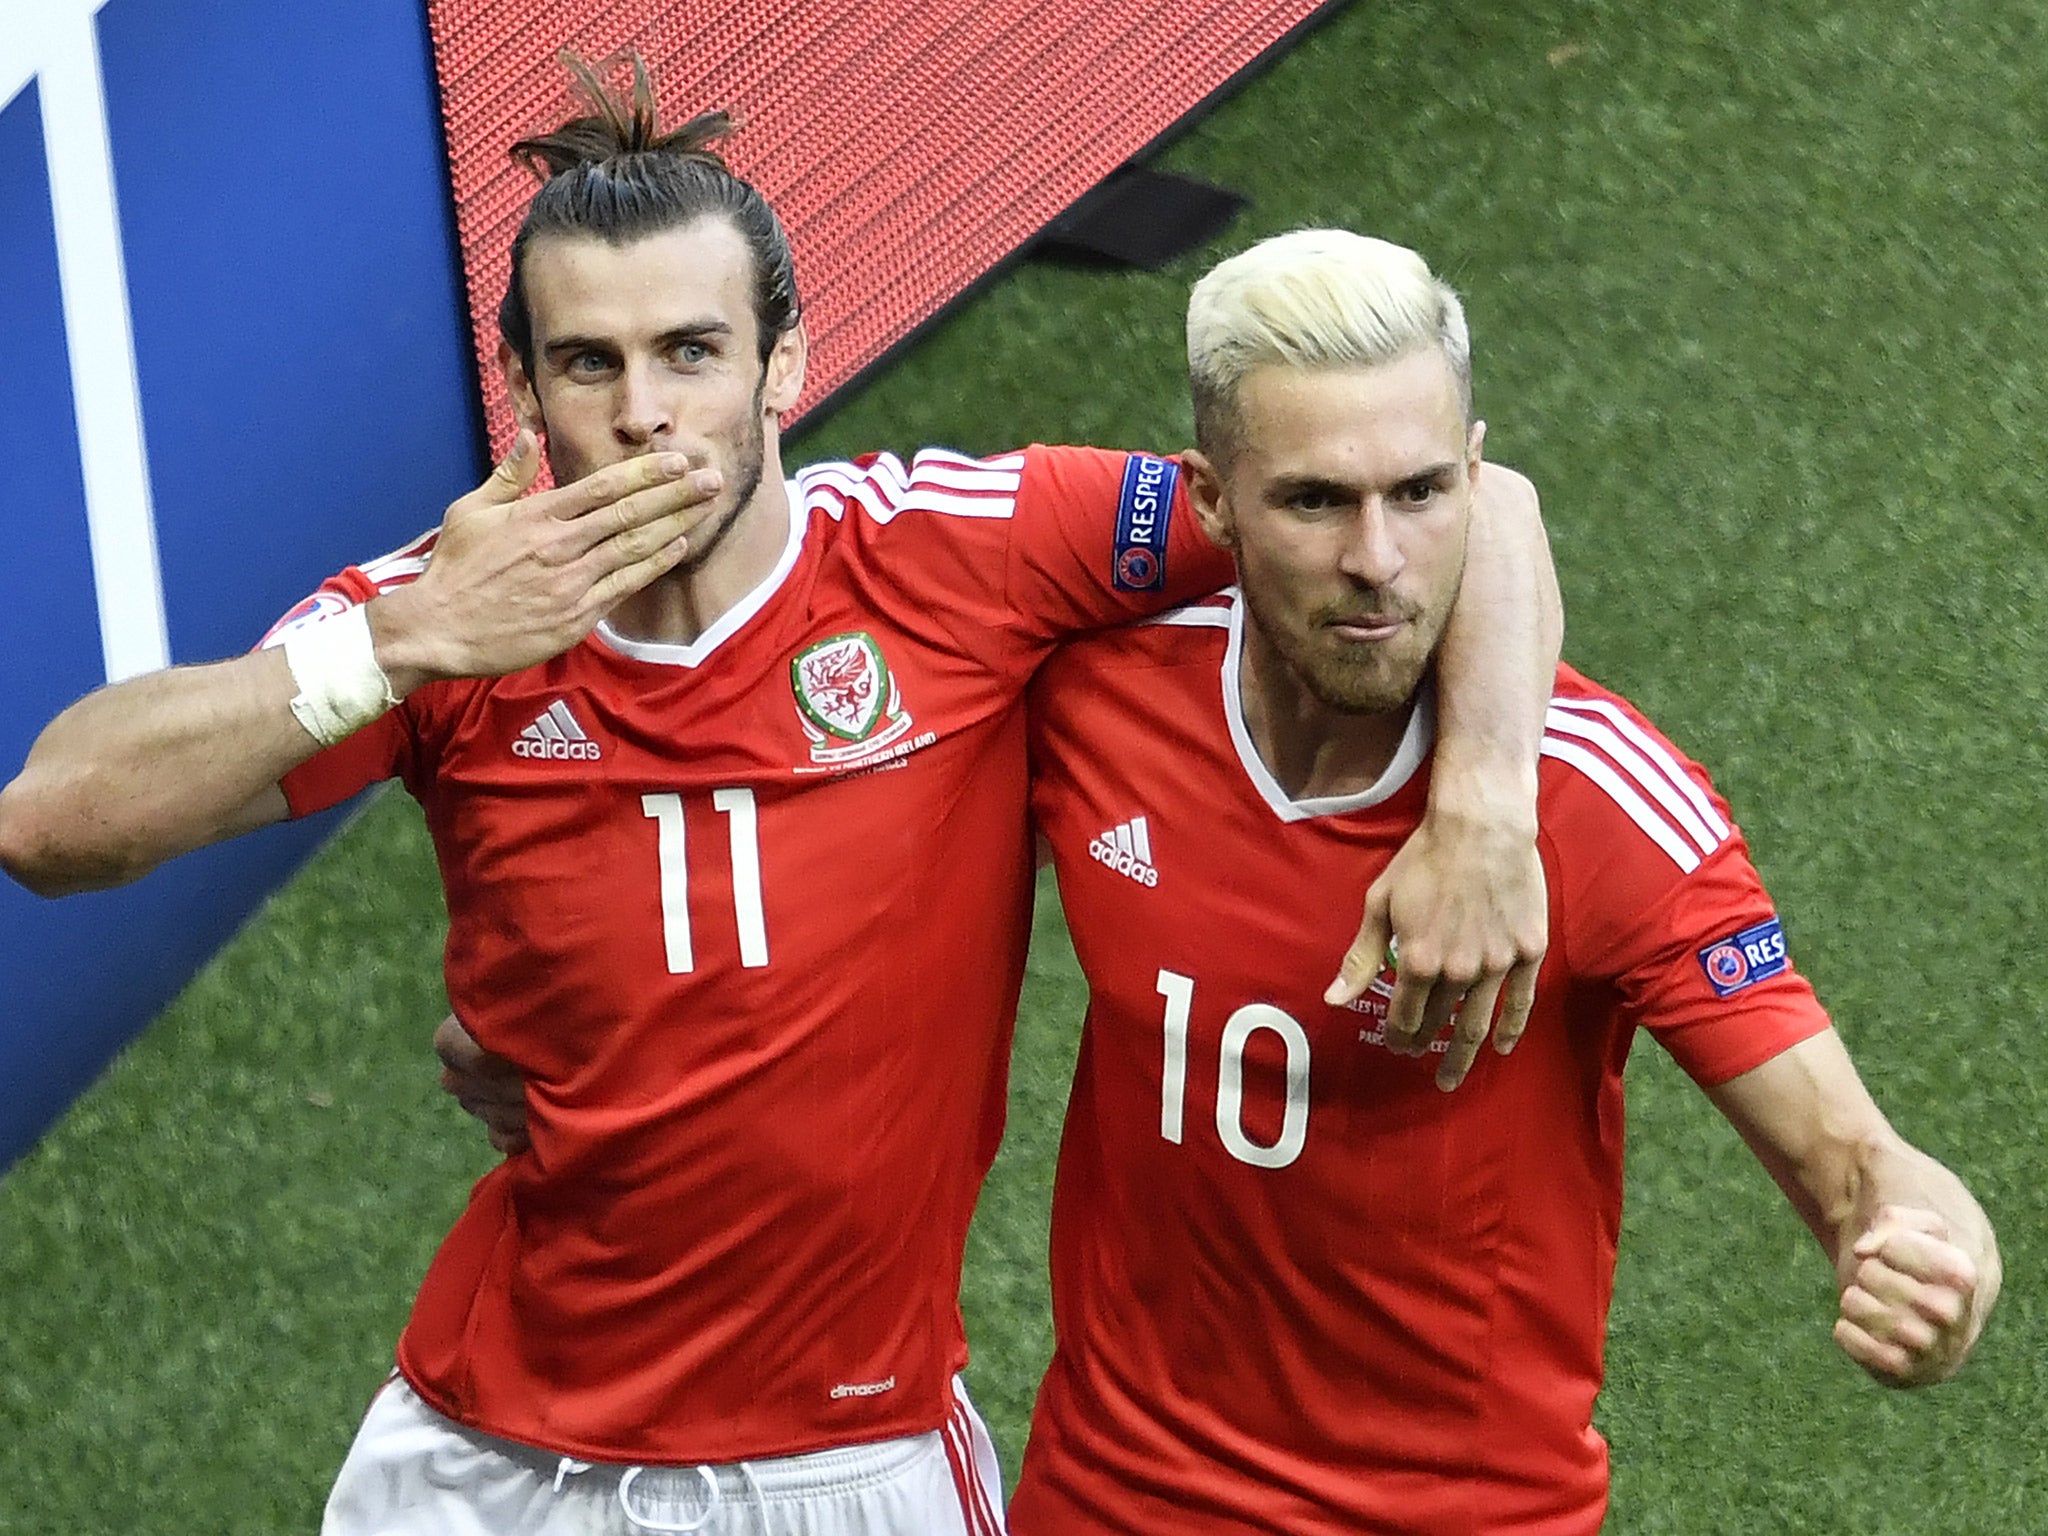 Gareth Bale and Aaron Ramsey celebrate after Gareth McAuley's own goal gives Wales the lead